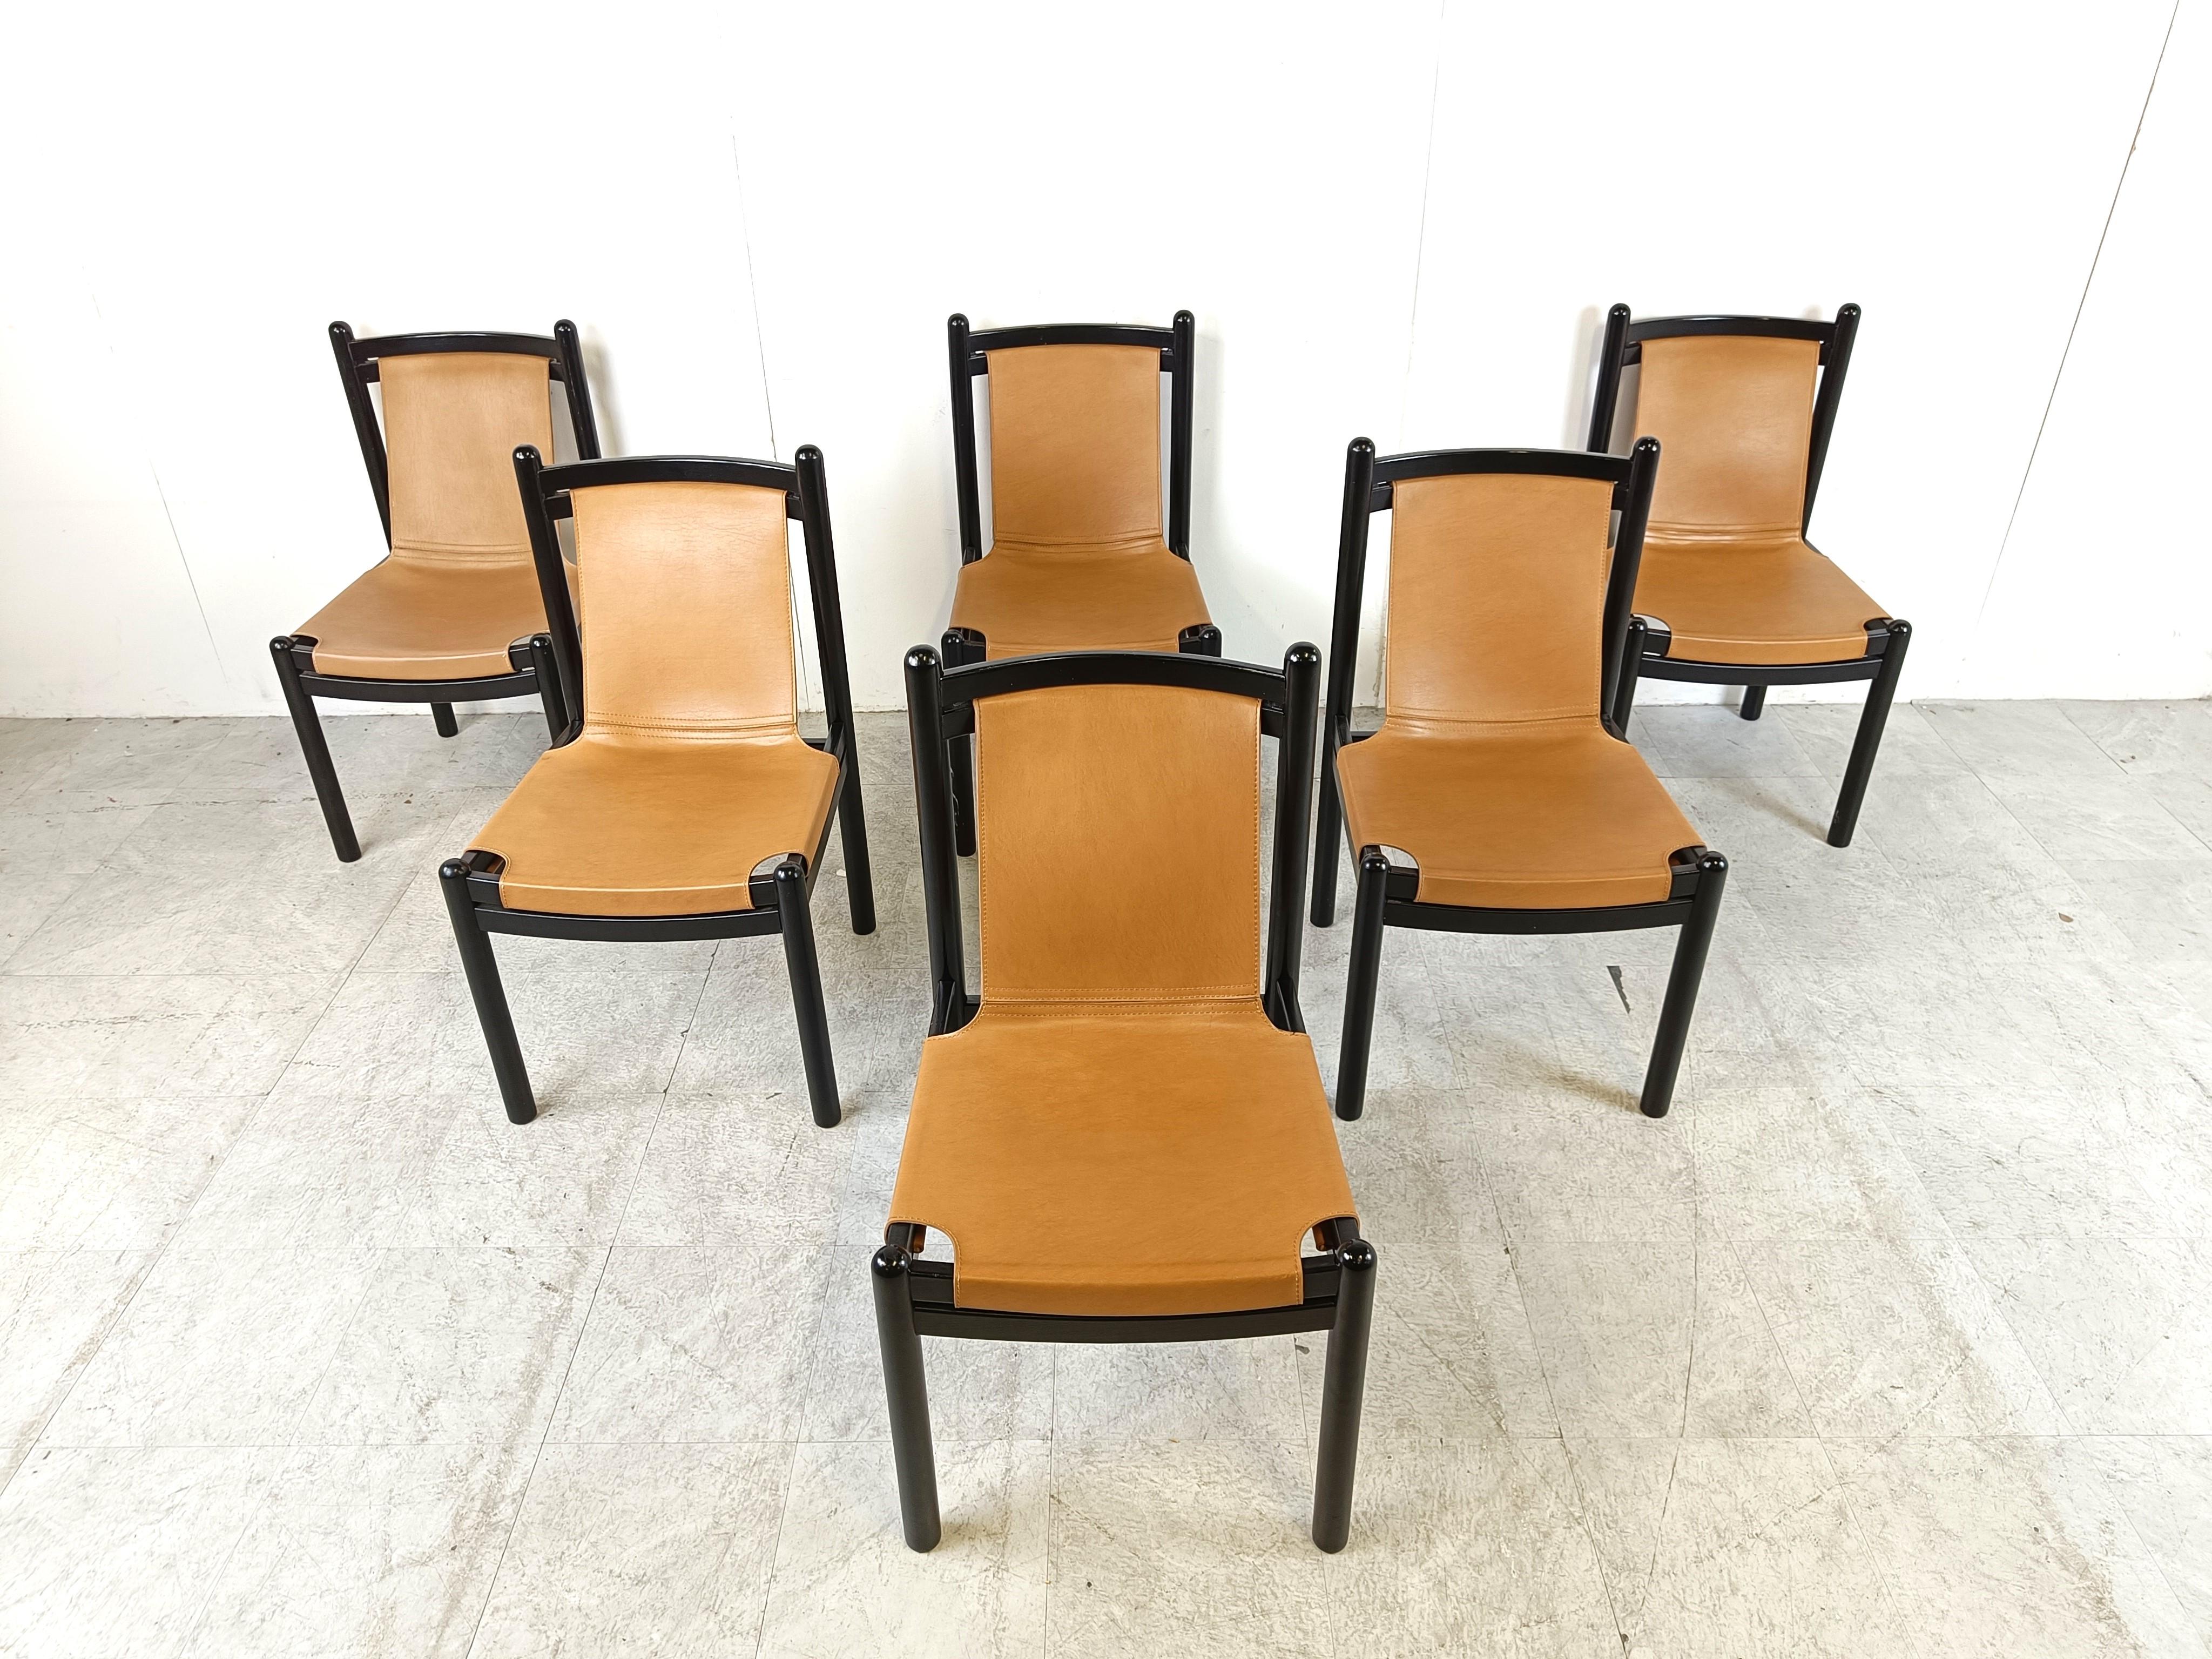 Mid century lacquered wooden dining chairs with camel brown sling leather seats.

Very elegant mid century chairs.

1960s - Italy

Dimensions:
Height: 88cm/33.46